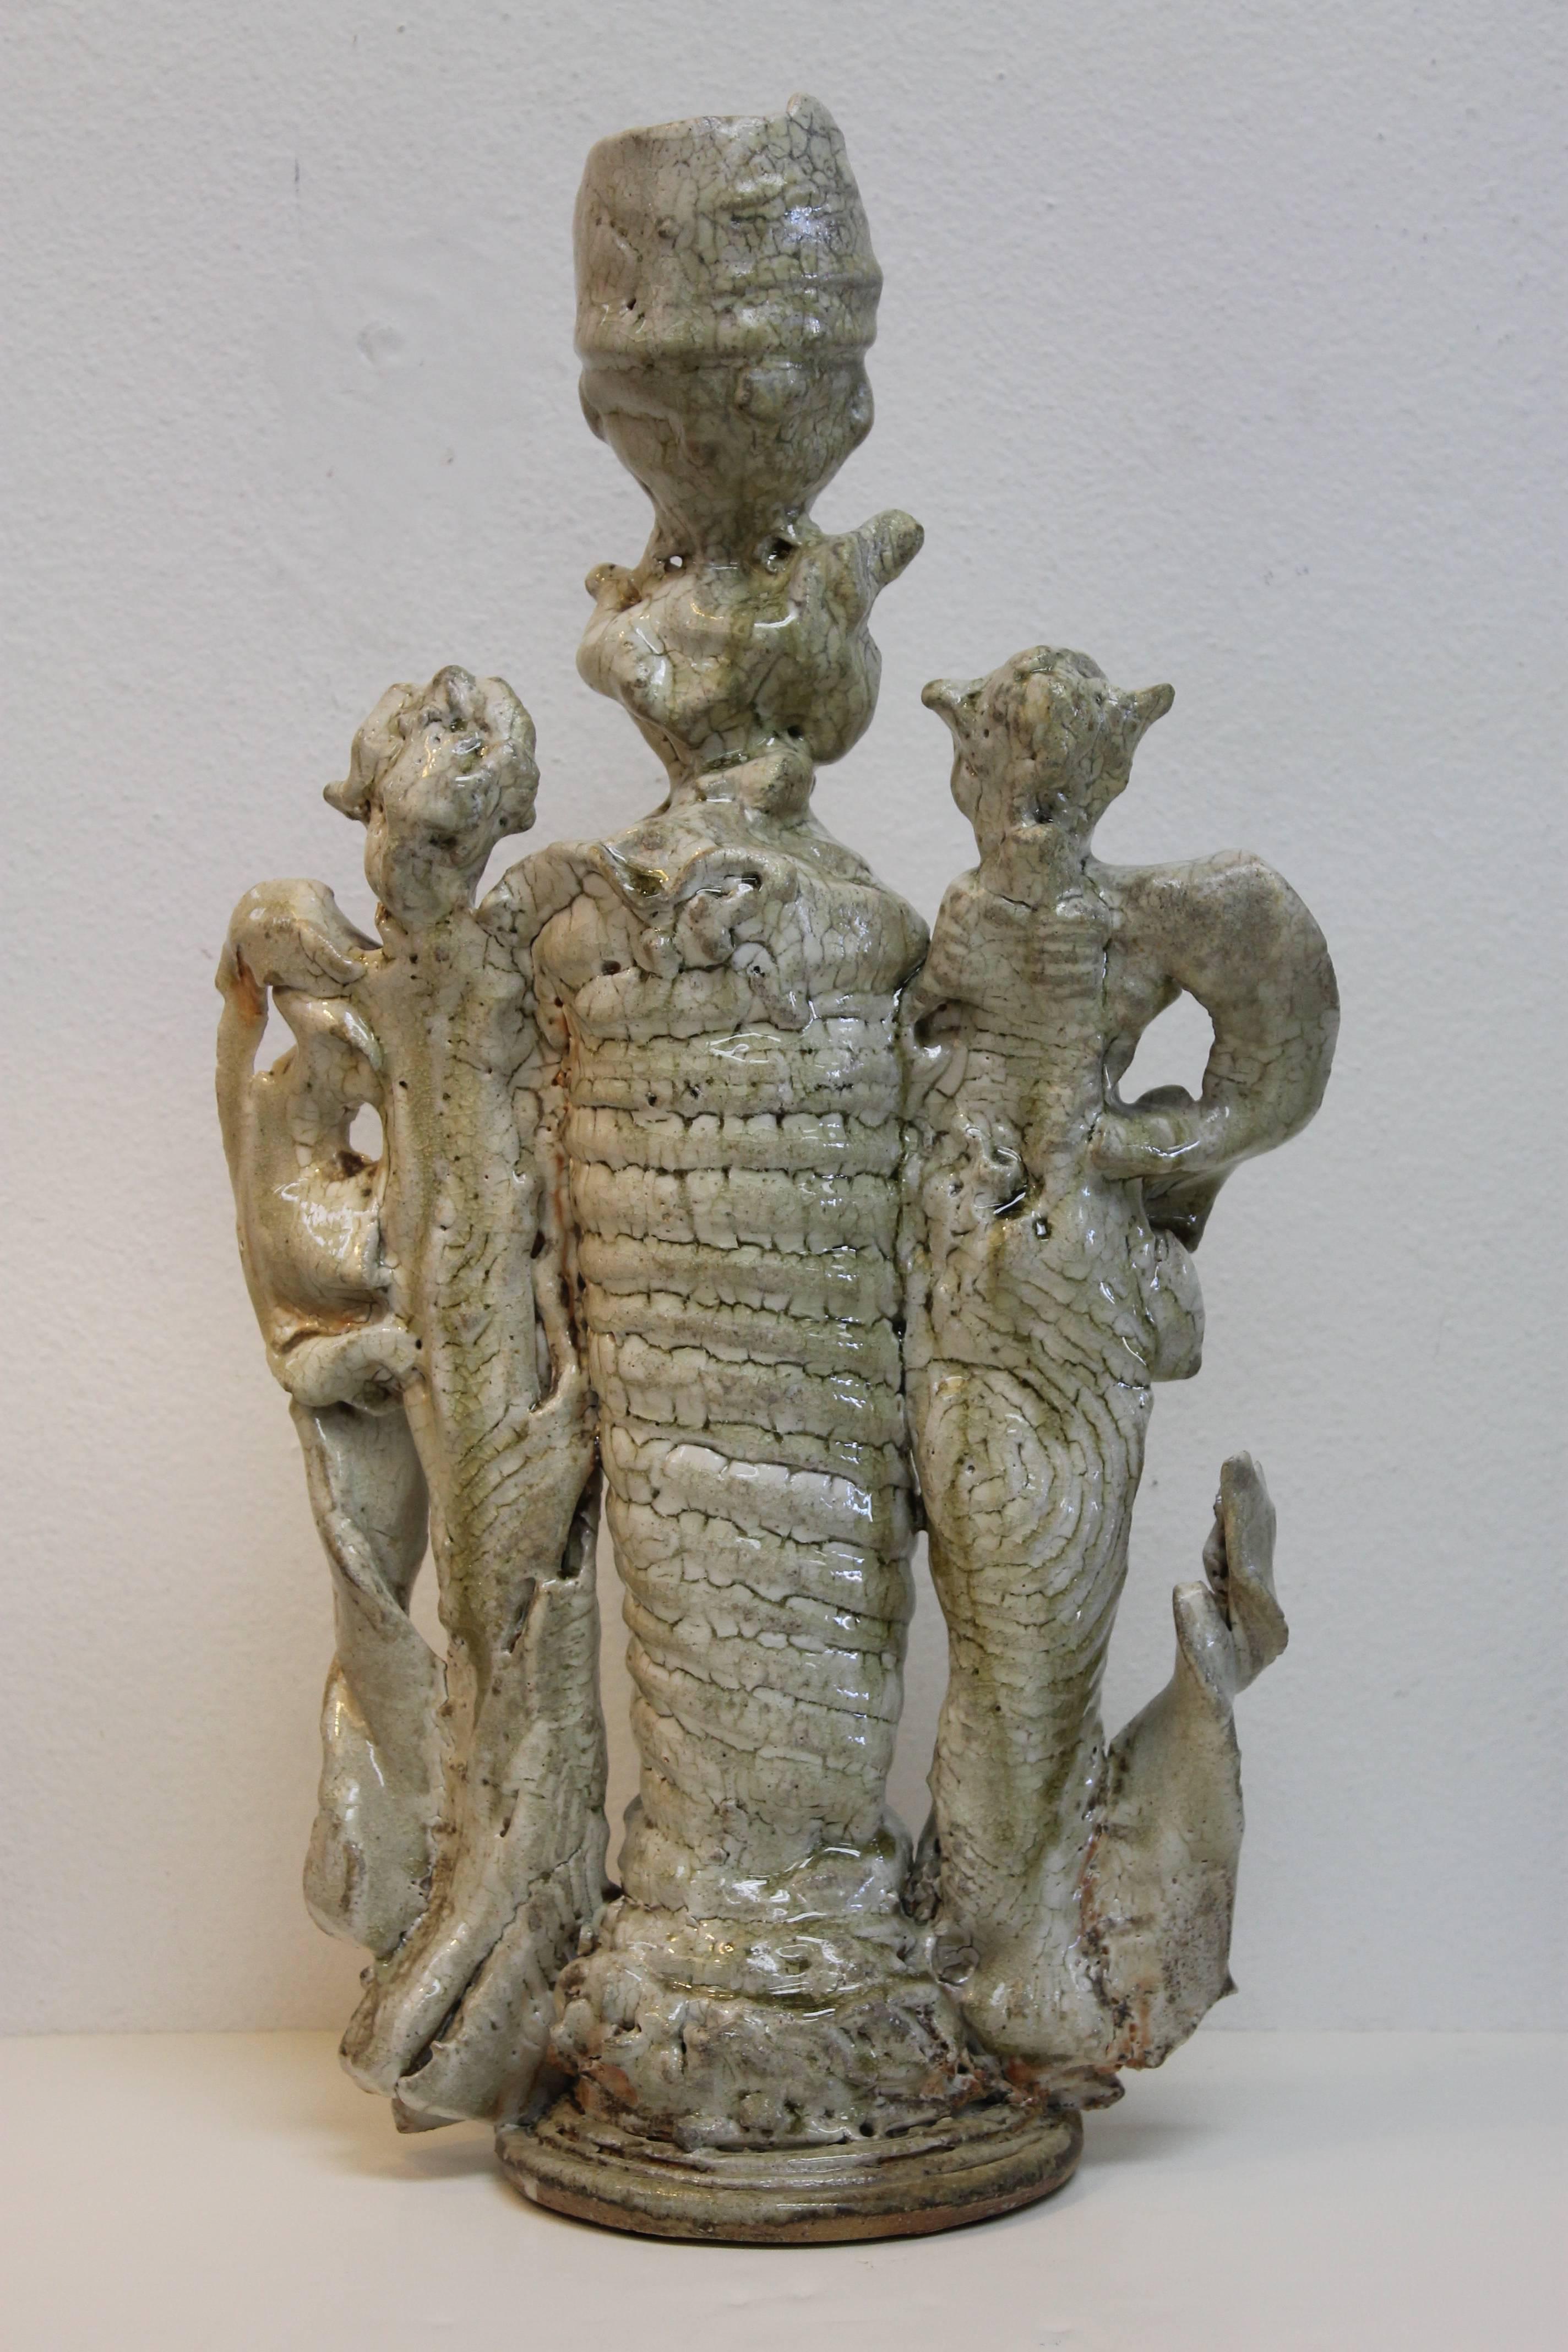 Ceramic sculpture from a show titled Wood Fired Ceramics from New Mexico. This show was in 2002 at the Robert Nichols Gallery in Santa Fe, NM. Robert showed a selection of wood fired ceramics from the anagama kiln near Madrid, New Mexico. Measures